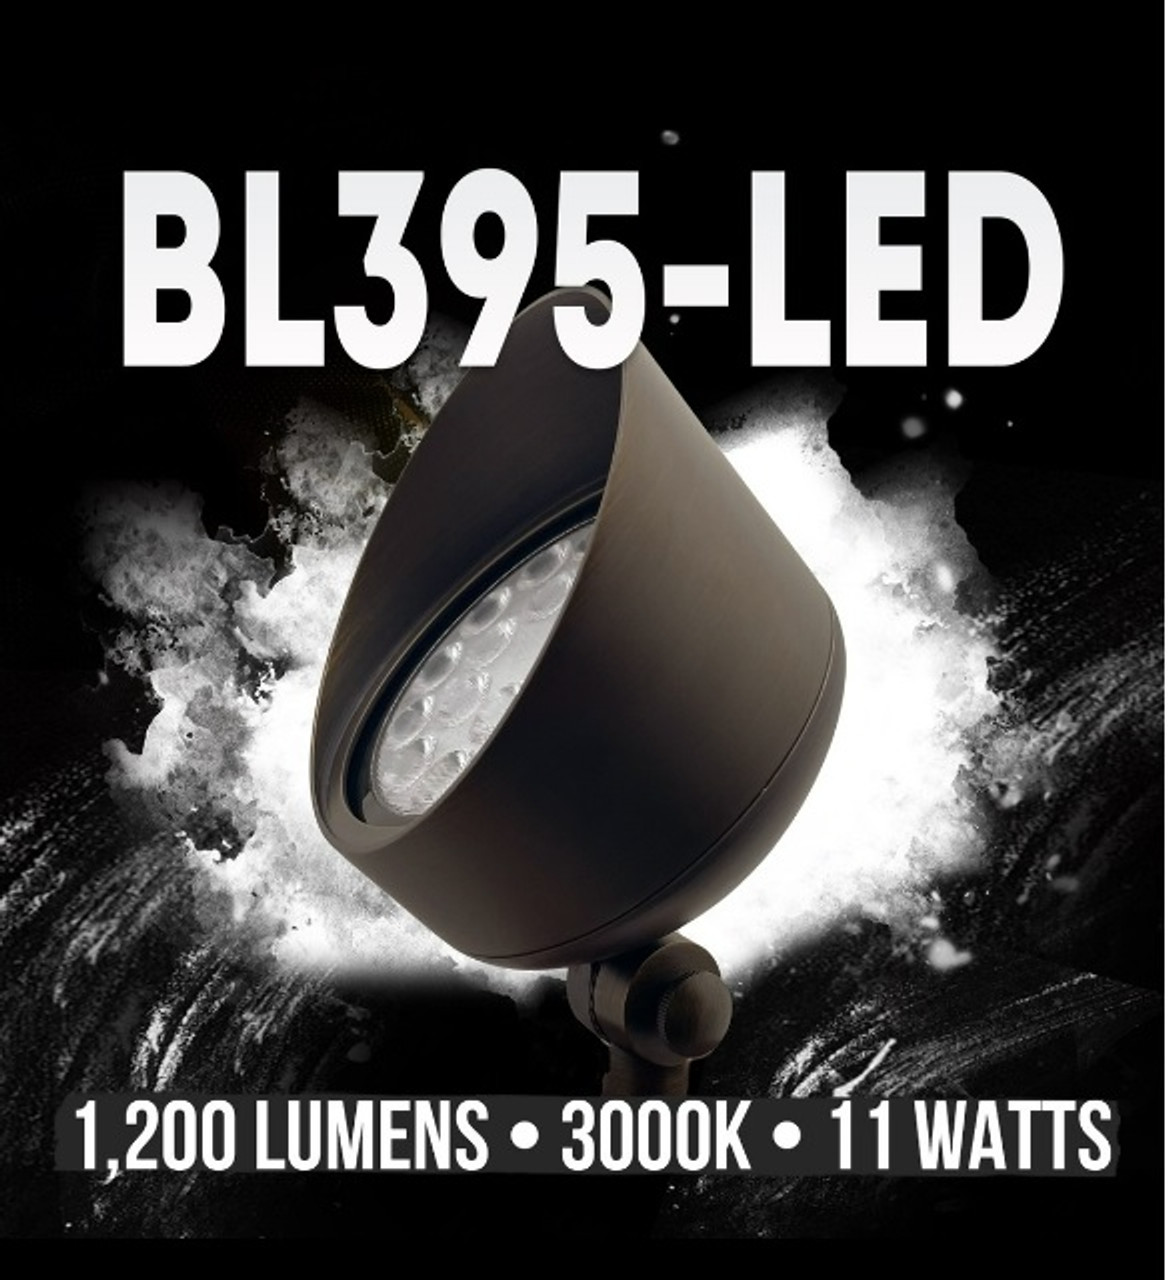 Alliance BL395-LED! With a 1,200 lumen output this fixture can be used to light up the tallest trees, buildings and structures.